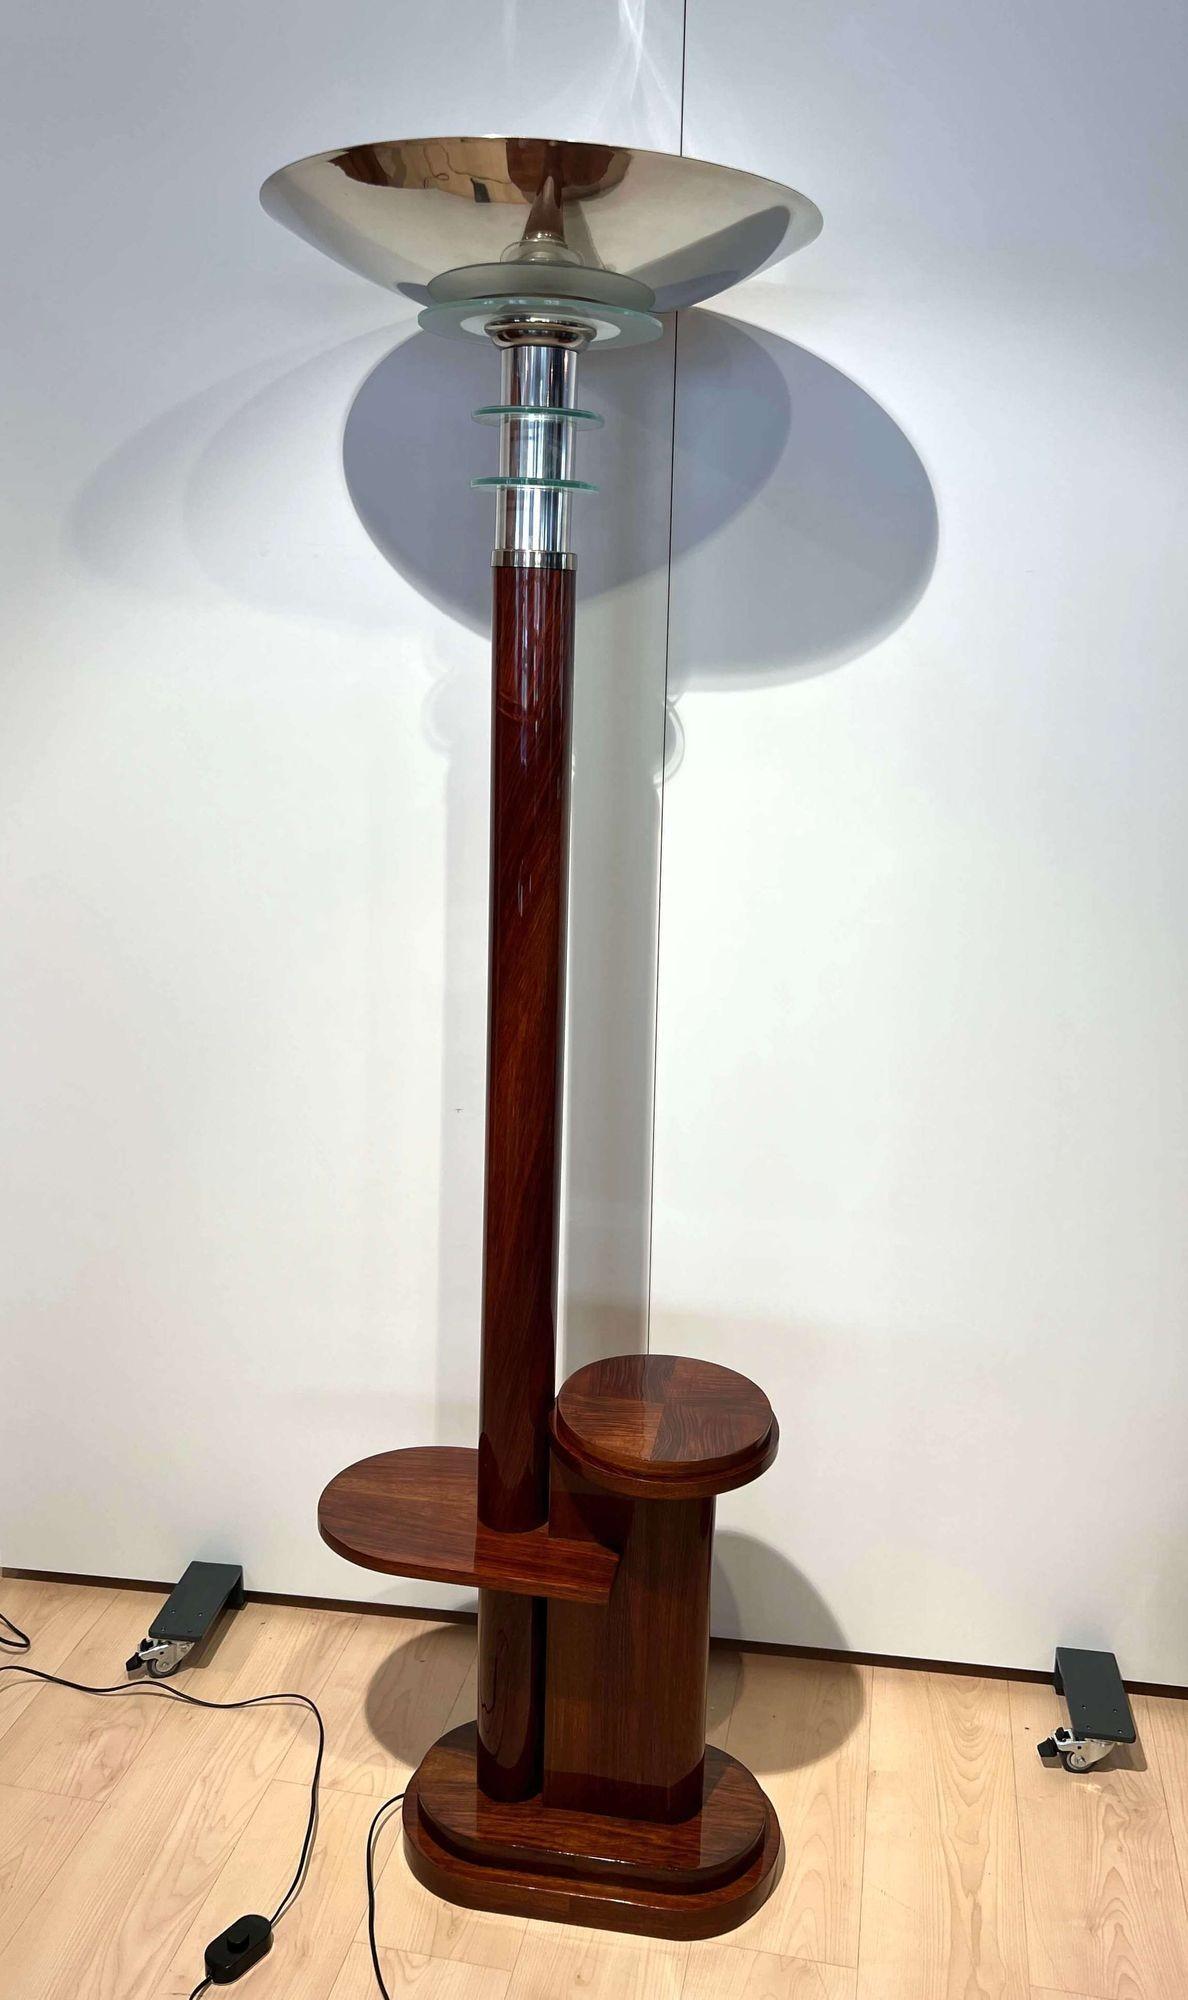 French Art Deco Floor Lamp with Side Table, Walnut and Chrome, France, circa 1930 For Sale